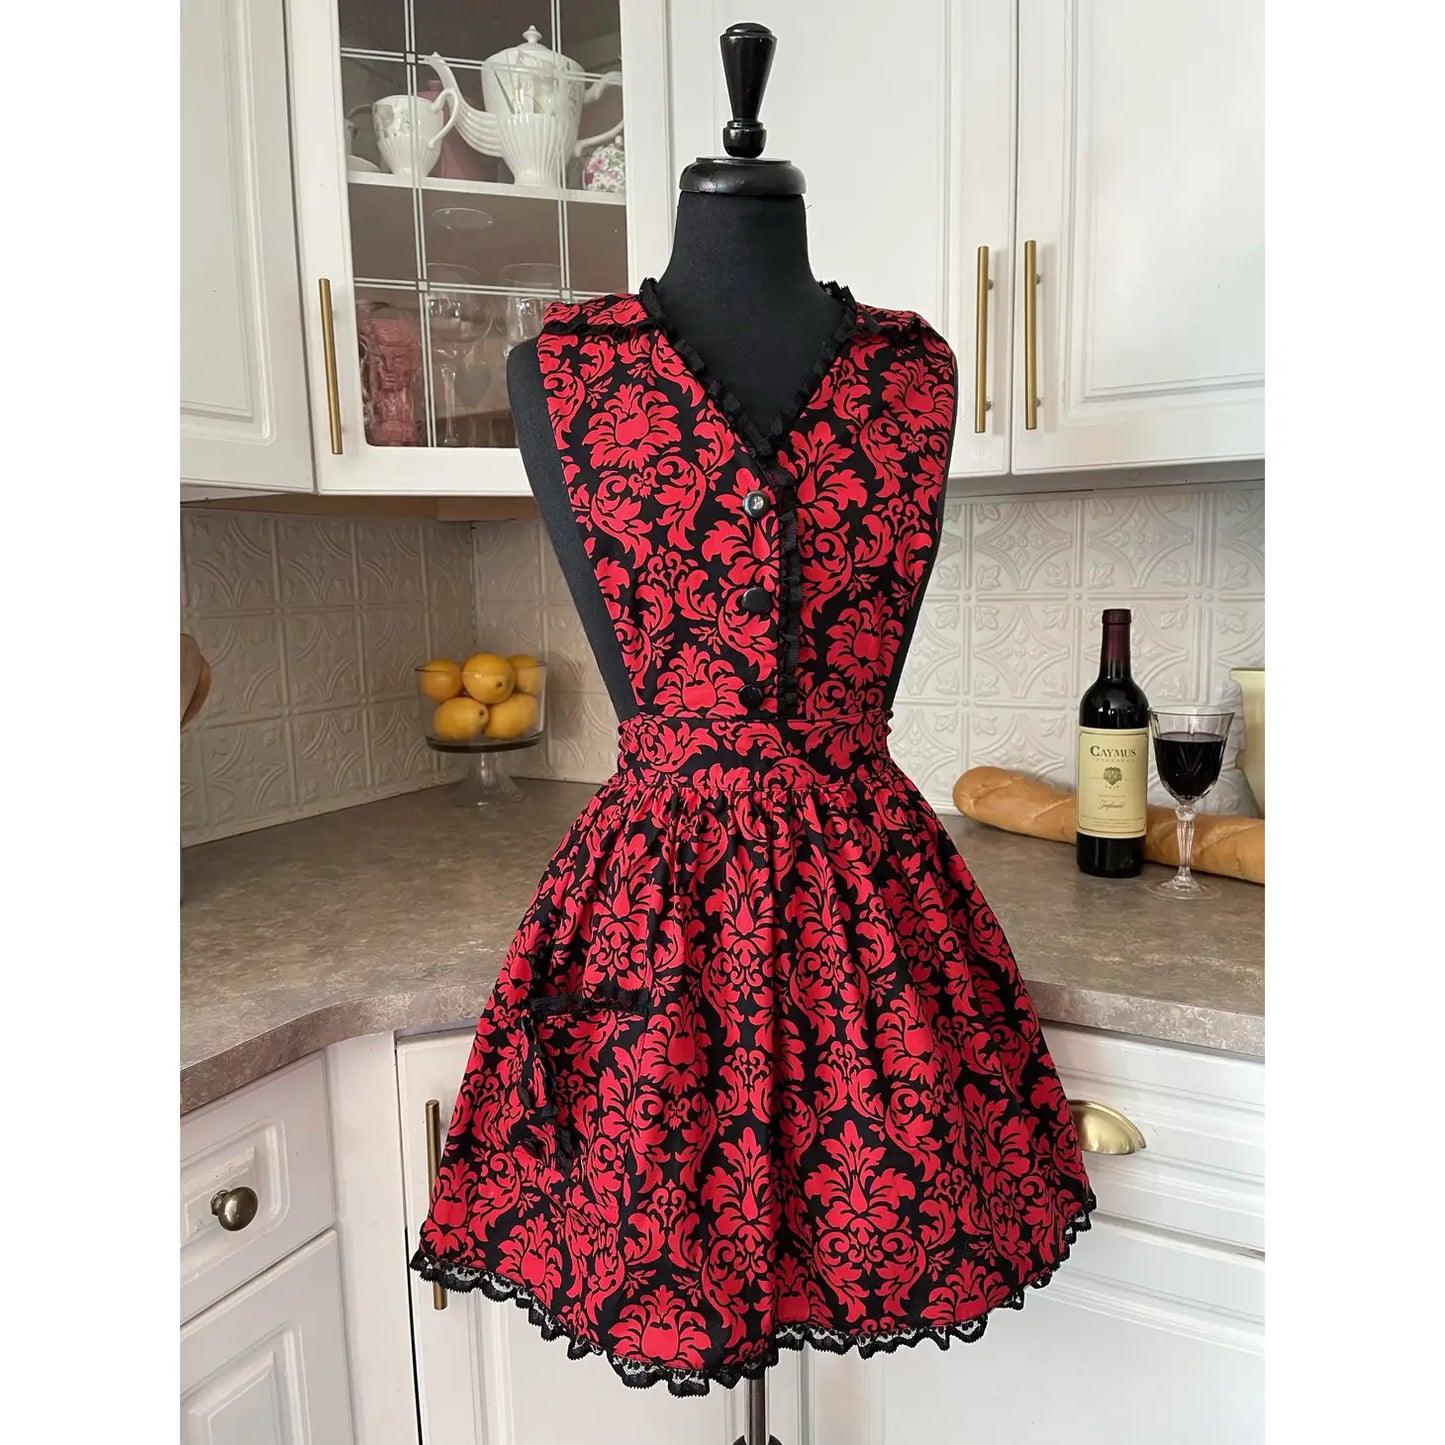 Ruby Red Domestic Darling Apron